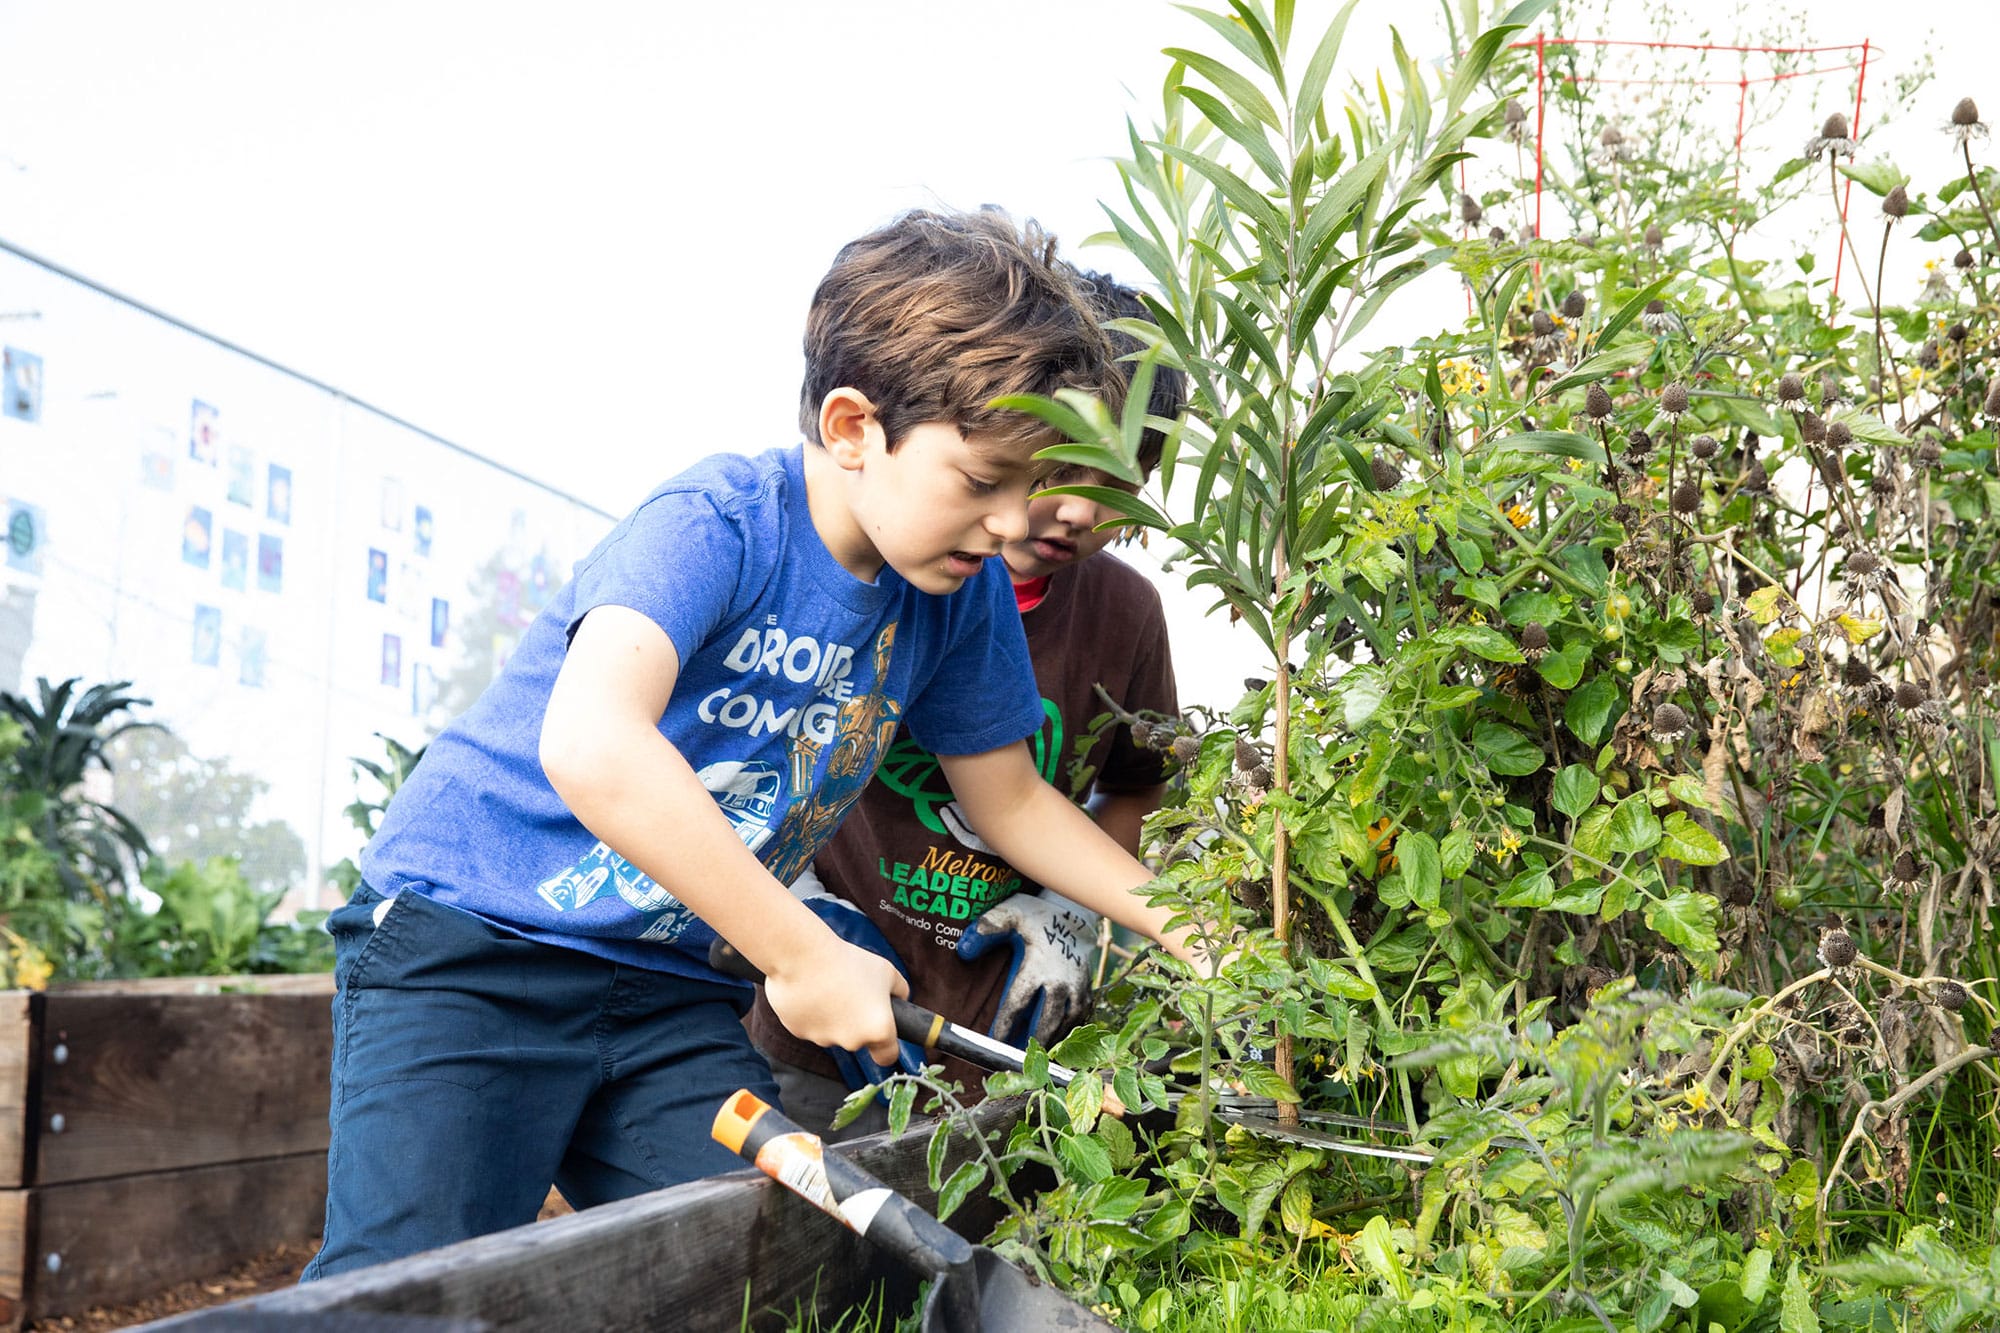 Two boys working in a garden.